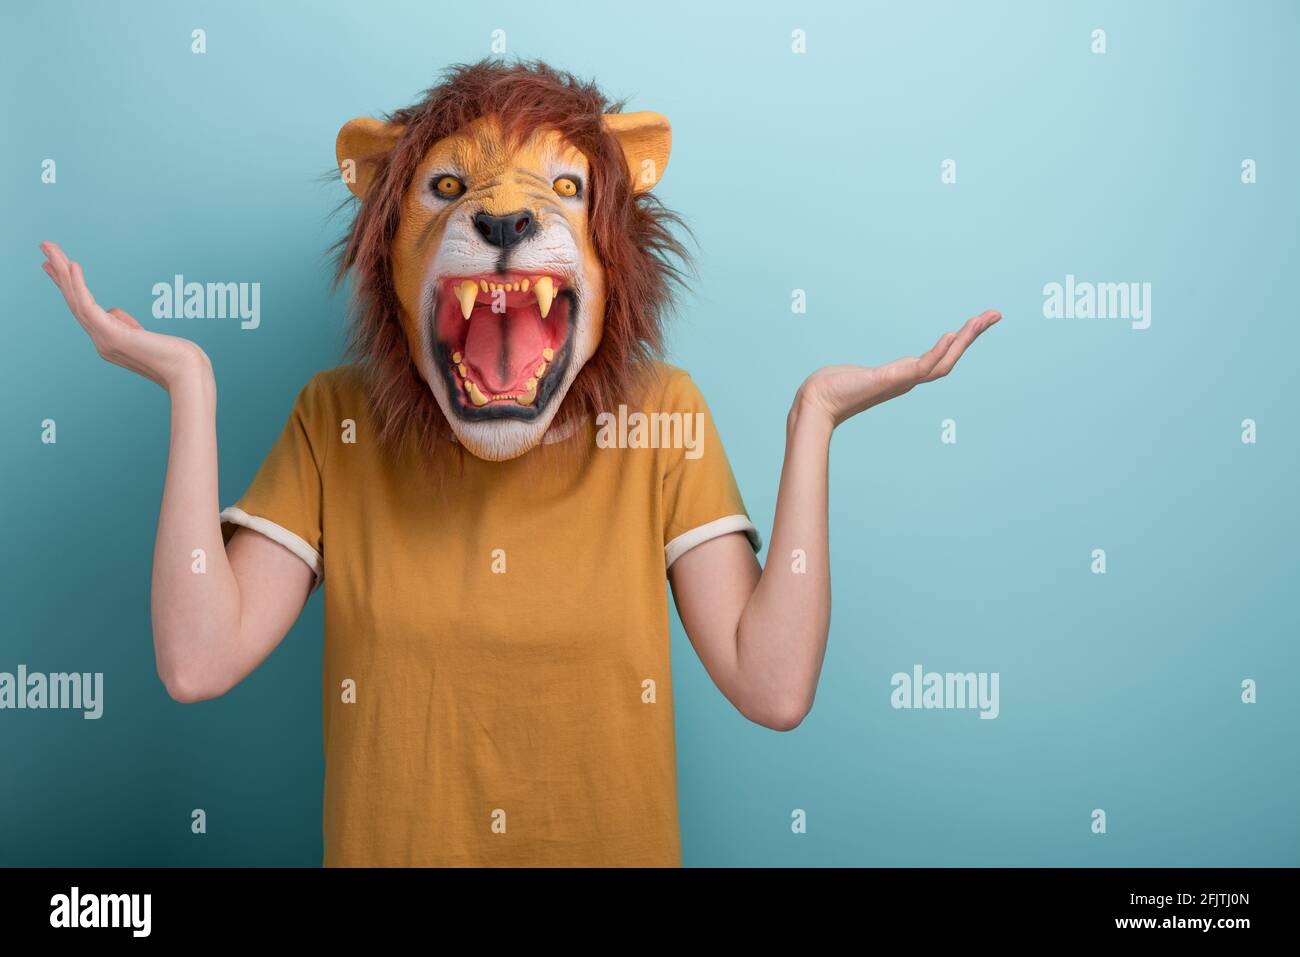 Confused young woman in lion mask standing and shrugging shoulders Stock Photo